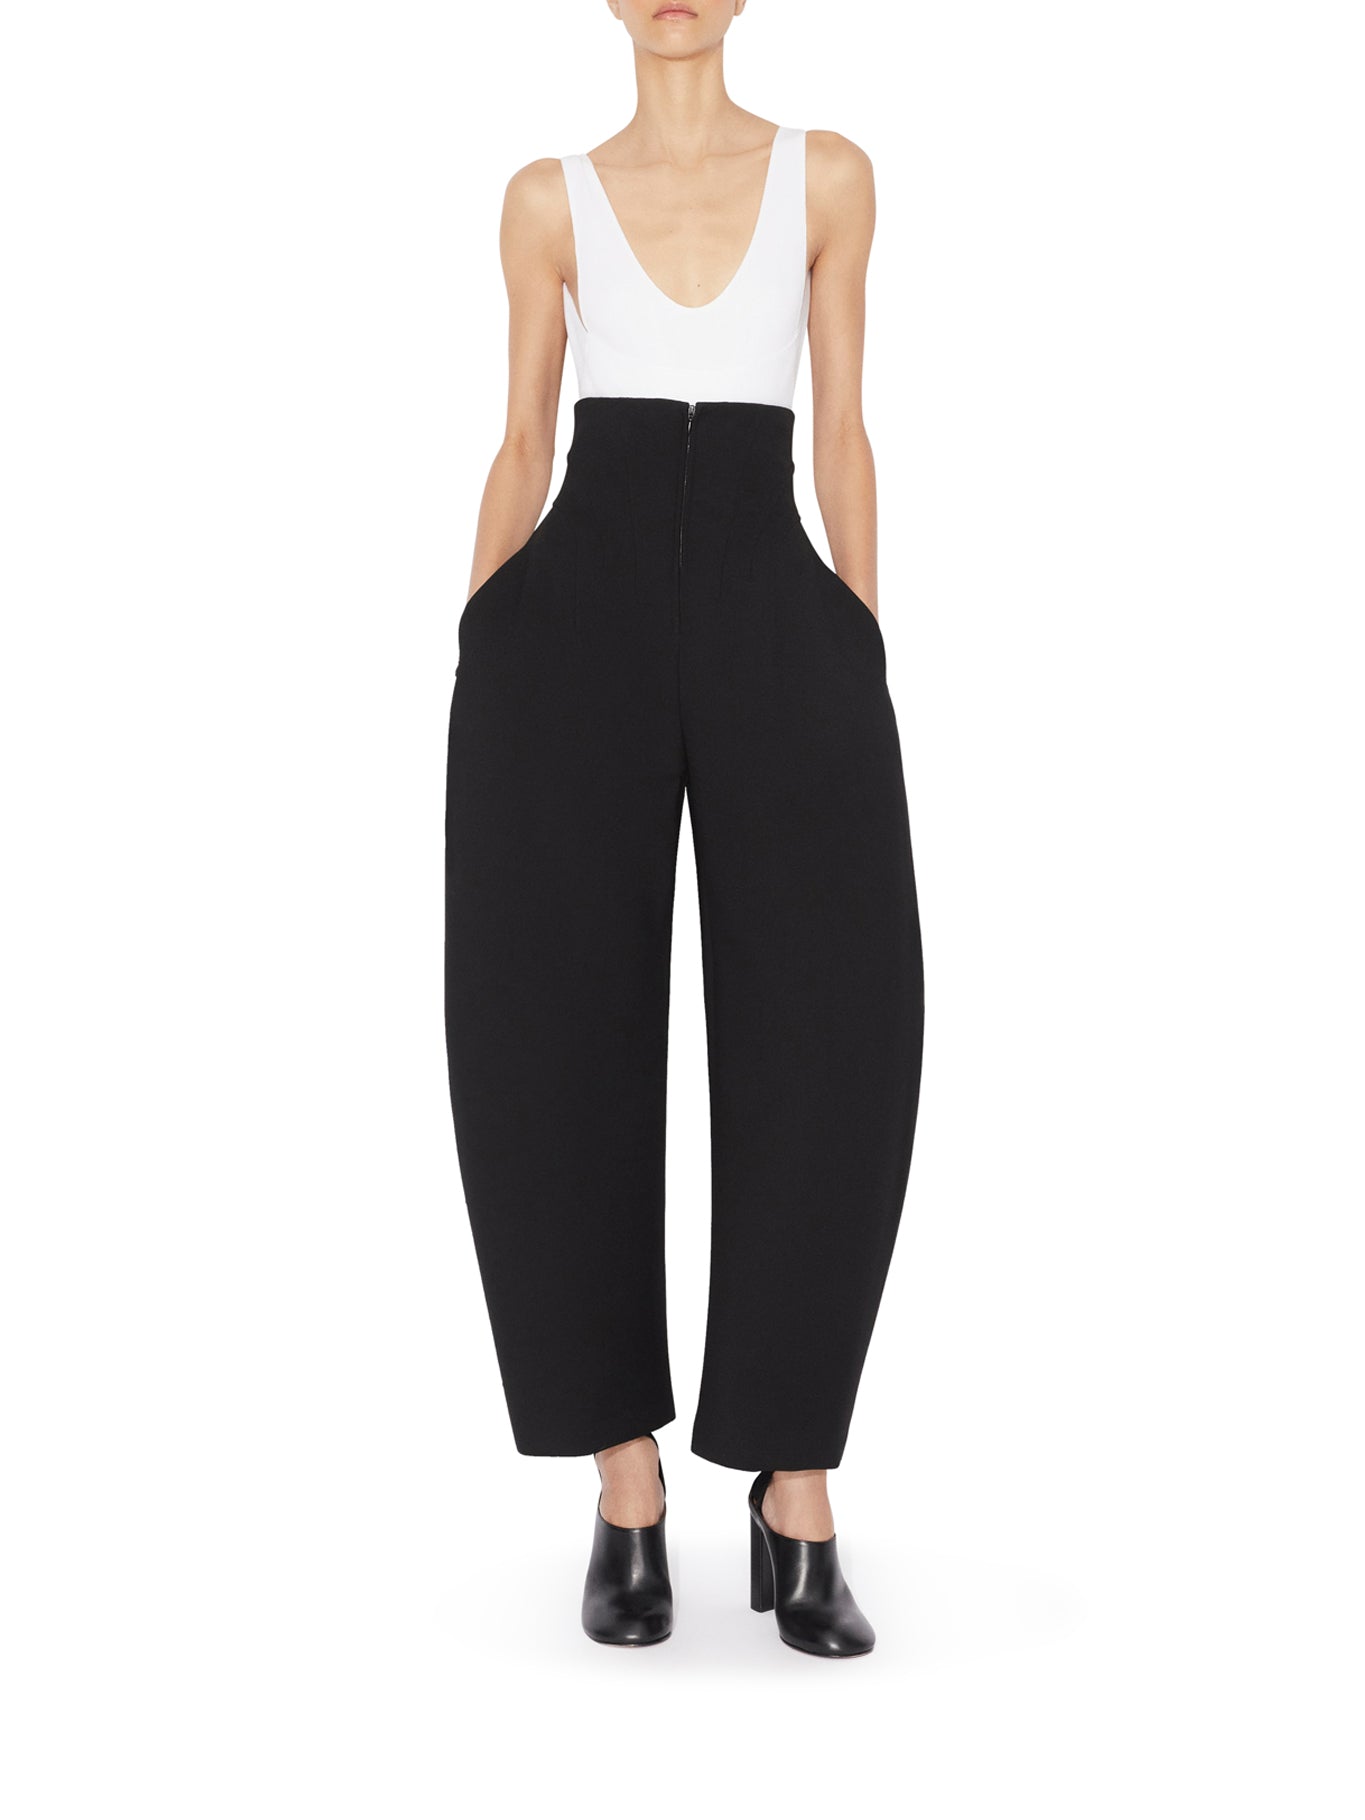 ROUNDED CORSET PANTS